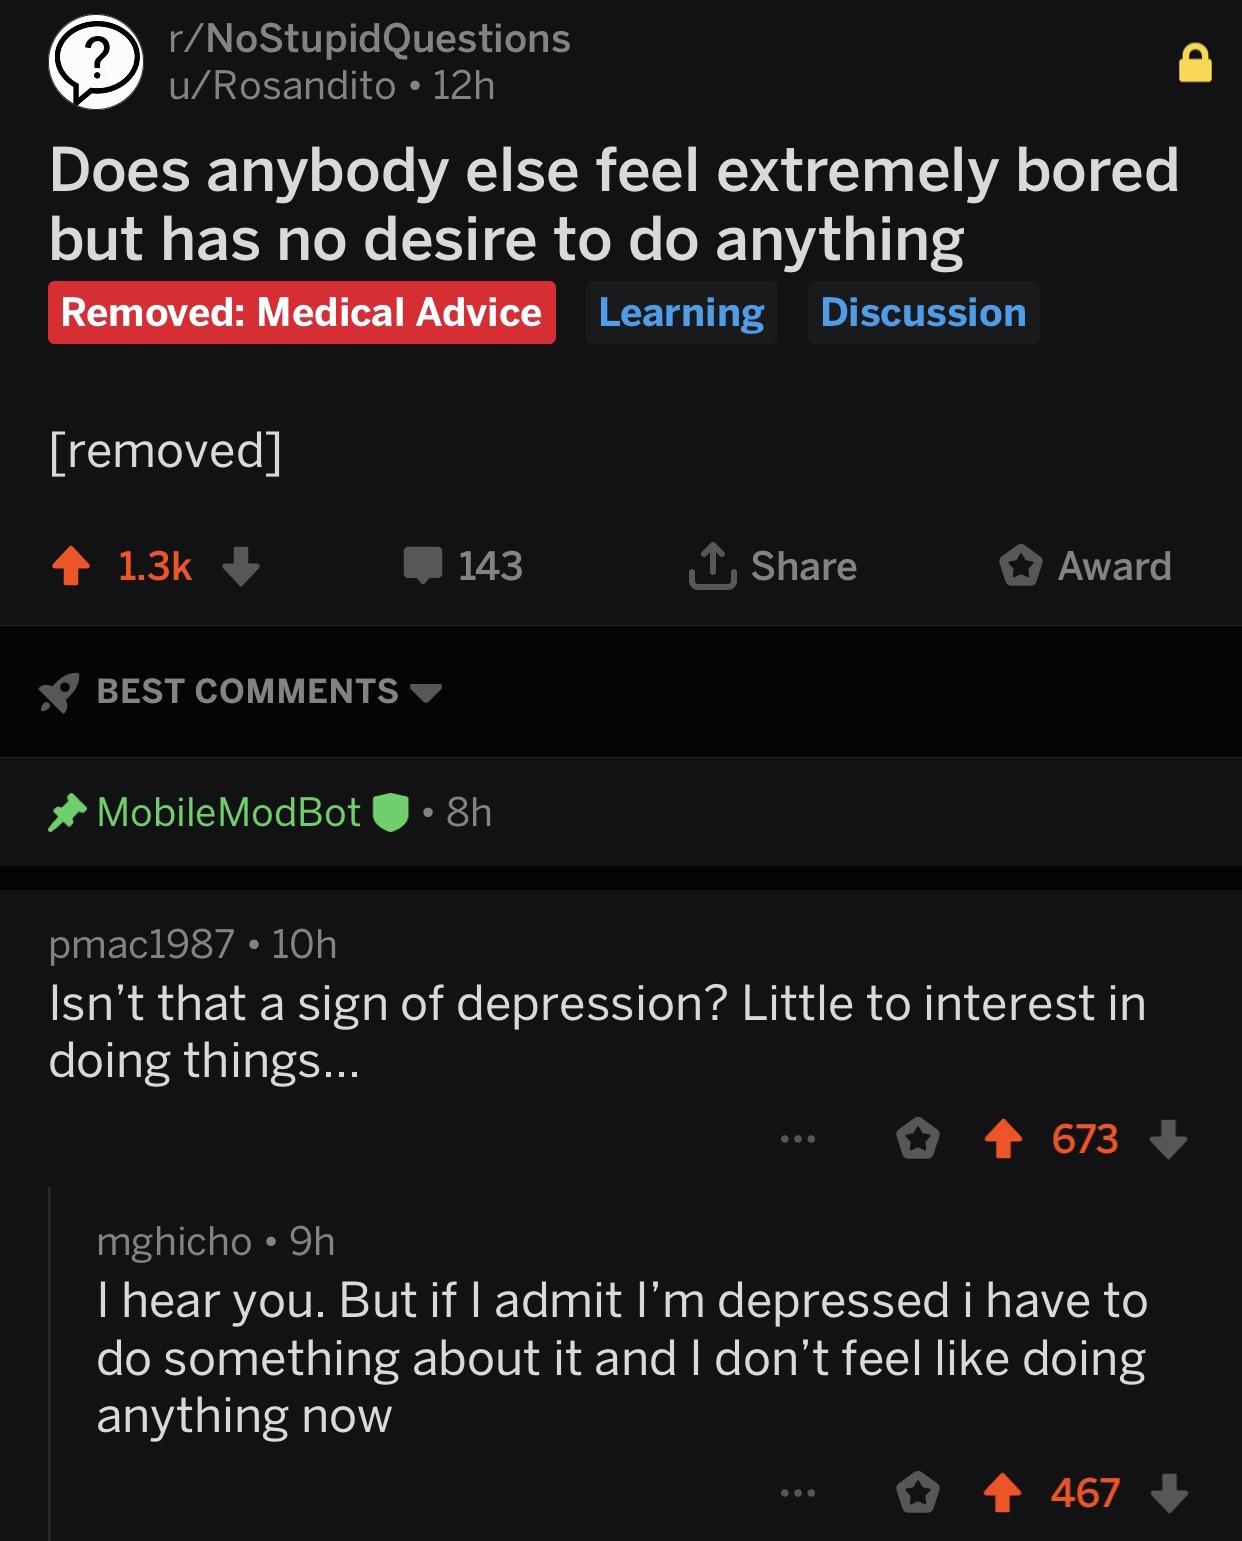 depression depression-memes depression text: r/NoStupidQuestions u/ Rosandito • 12h Does anybody else feel extremely bored but has no desire to do anything Removed: Medical Advice Learning Discussion [removed] s:' 143 BEST COMMENTS MobileM0dB0t • 8h pmac1987 • IOh L Share O Award Isn't that a sign of depression? Little to interest in doing things... O 673 + mghicho • 9h I hear you. But if I admit I'm depressed i have to do something about it and I don't feel like doing anything now O 467 + 